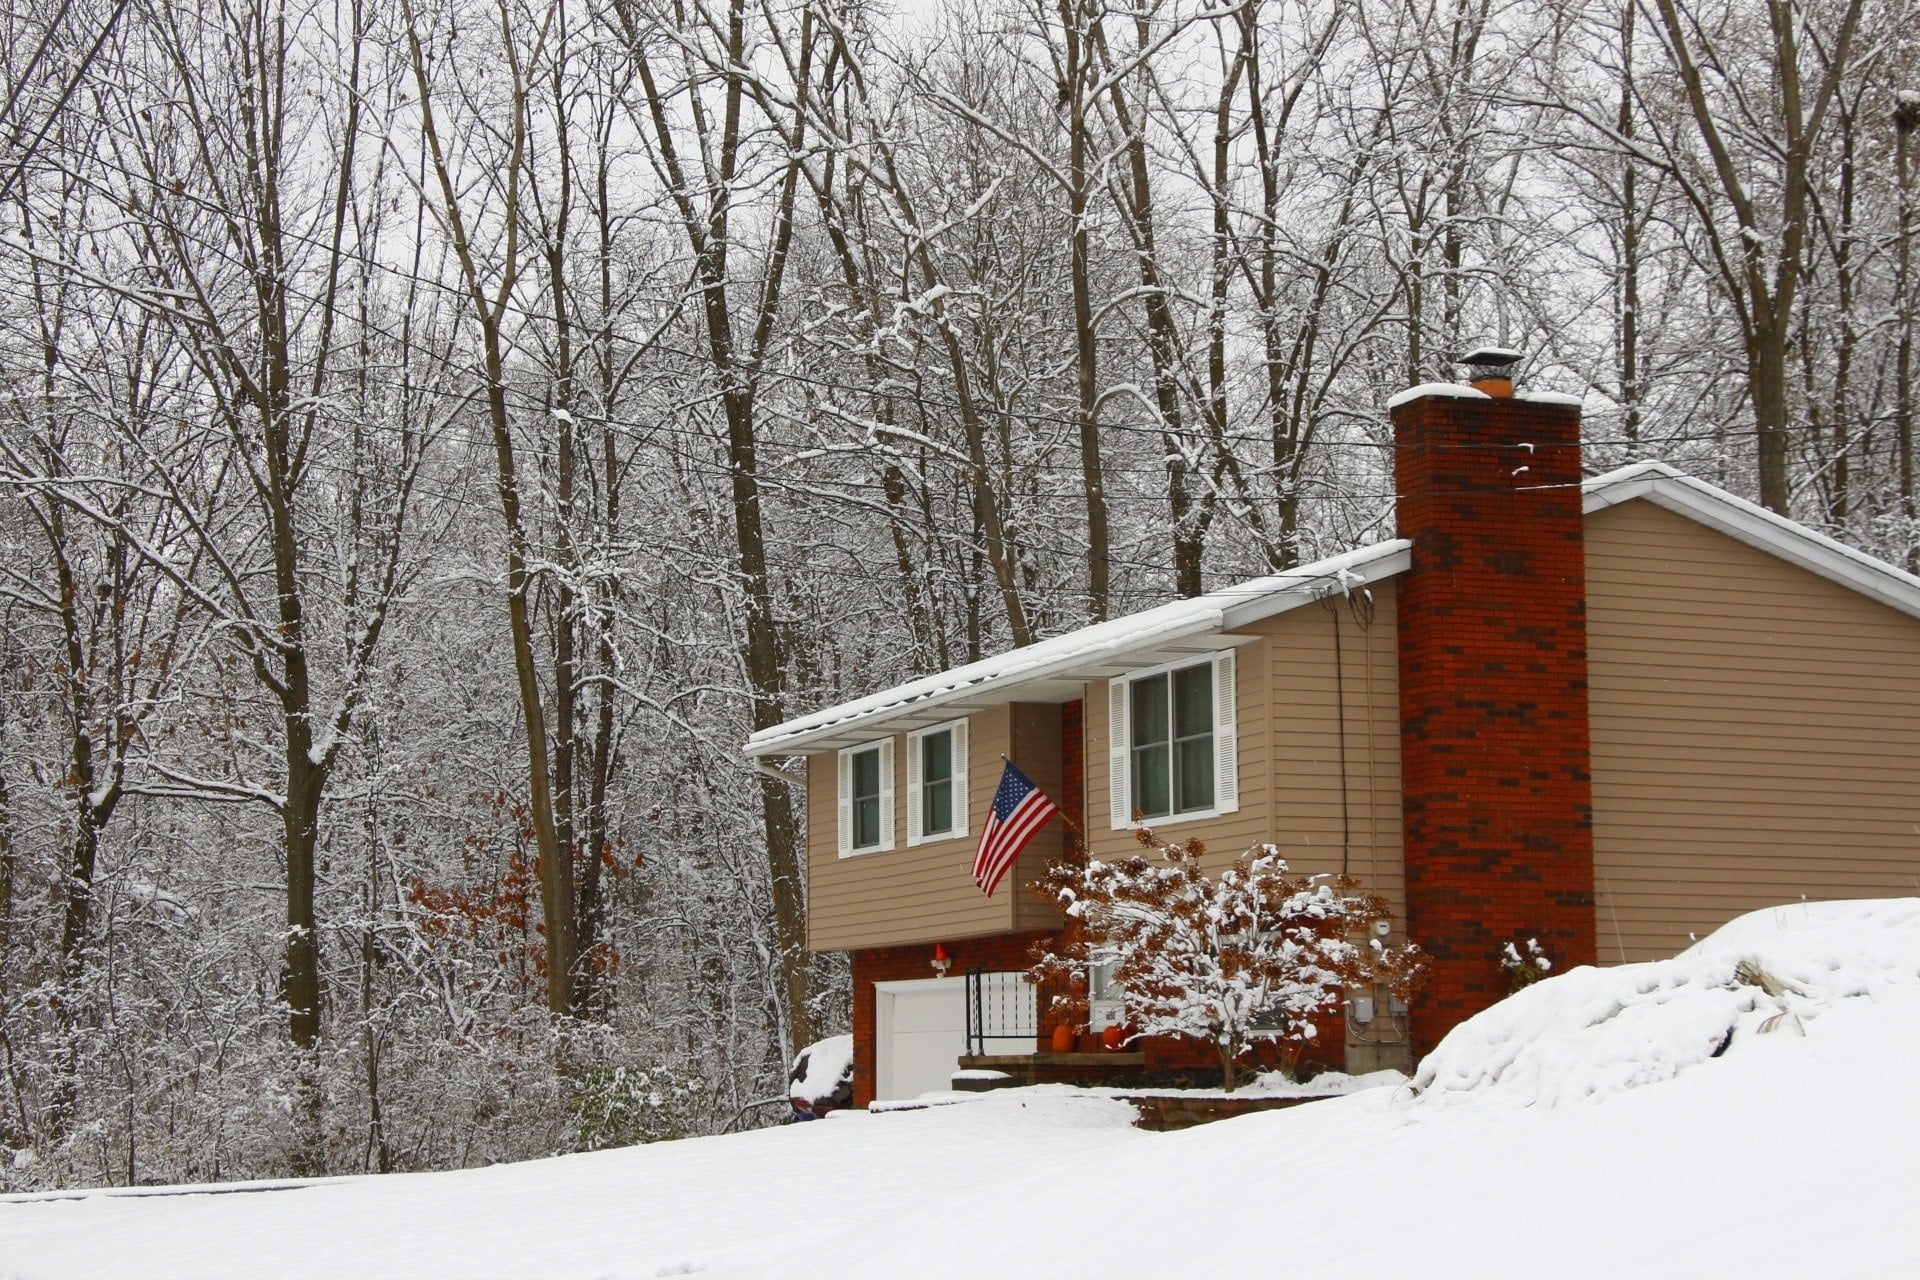 House in woods in winter covered in snow